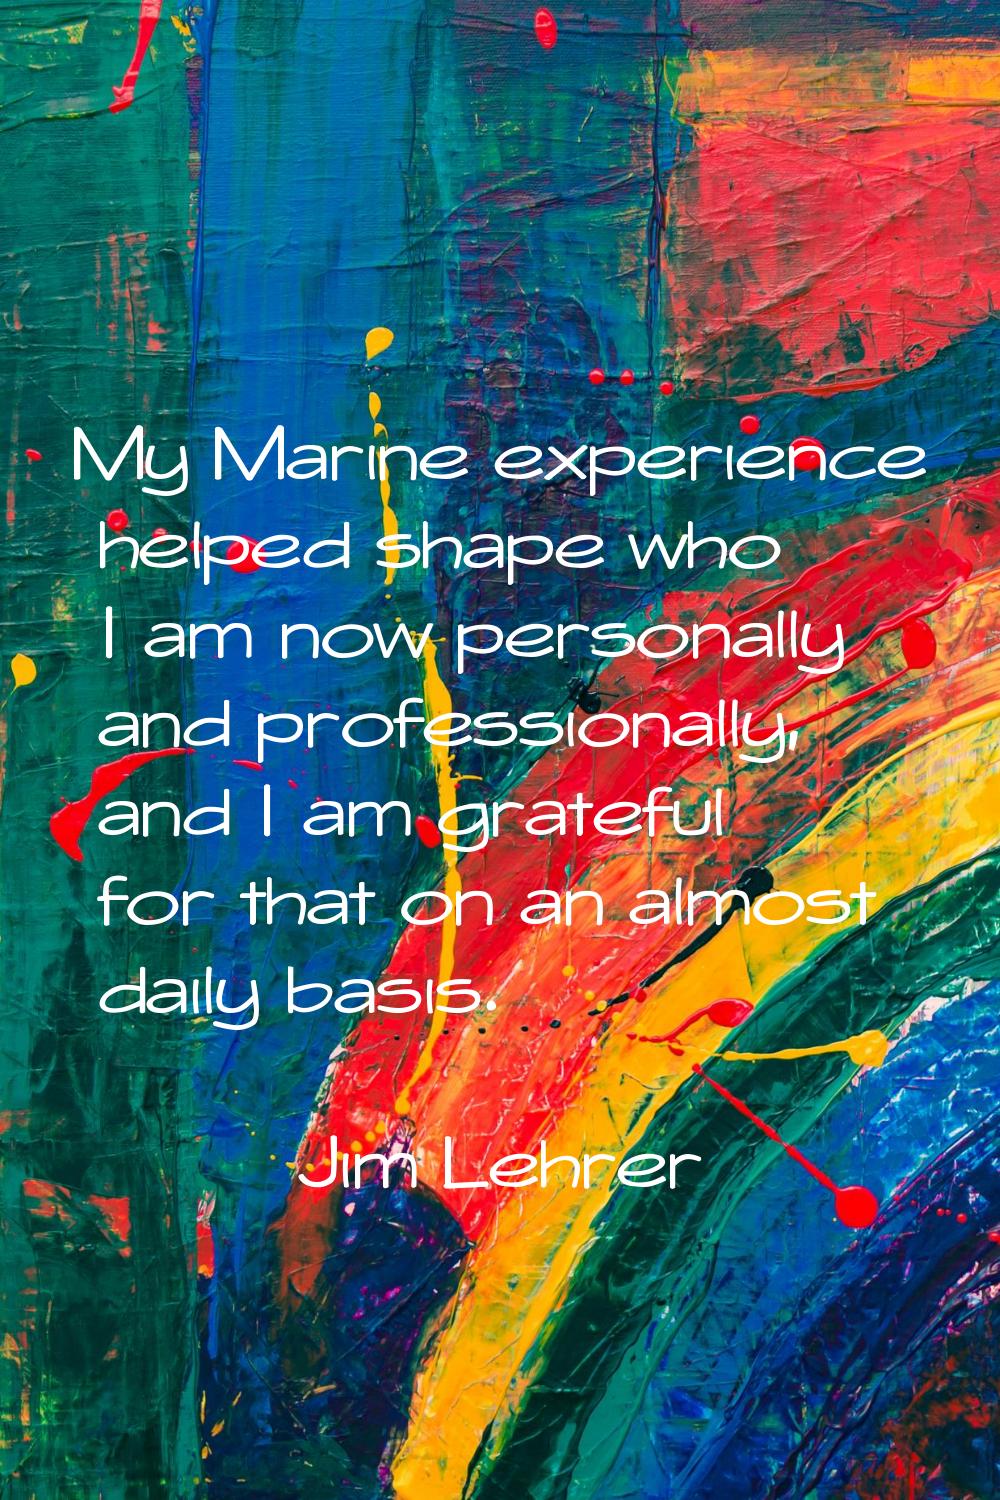 My Marine experience helped shape who I am now personally and professionally, and I am grateful for